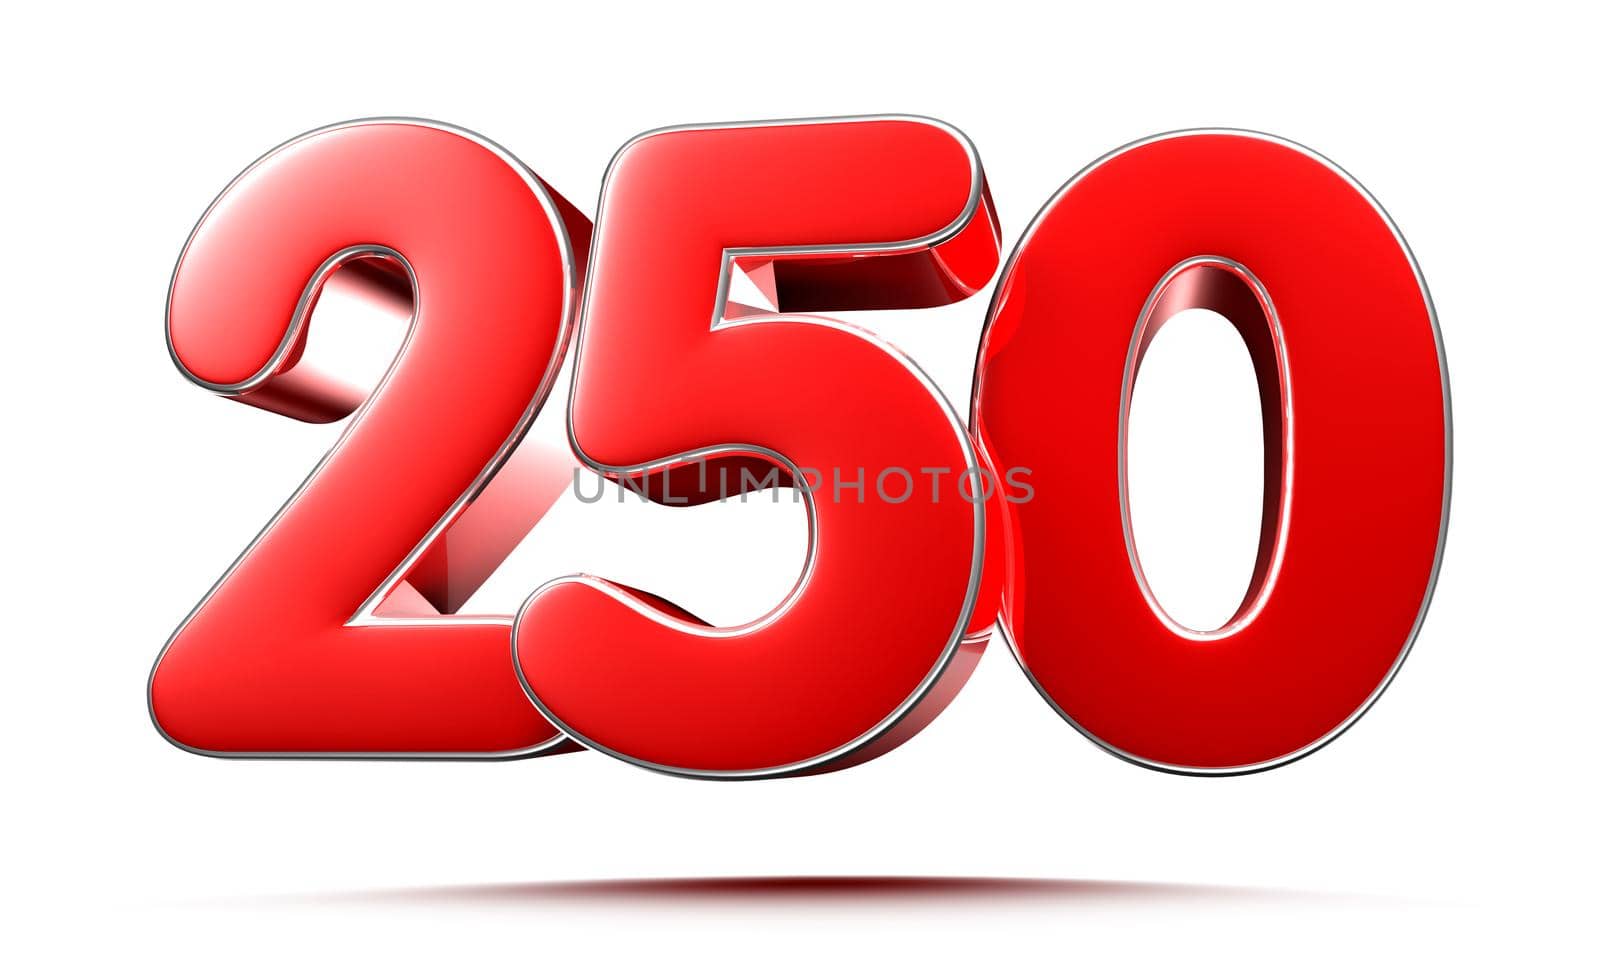 Rounded red numbers 250 on white background 3D illustration with clipping path by thitimontoyai